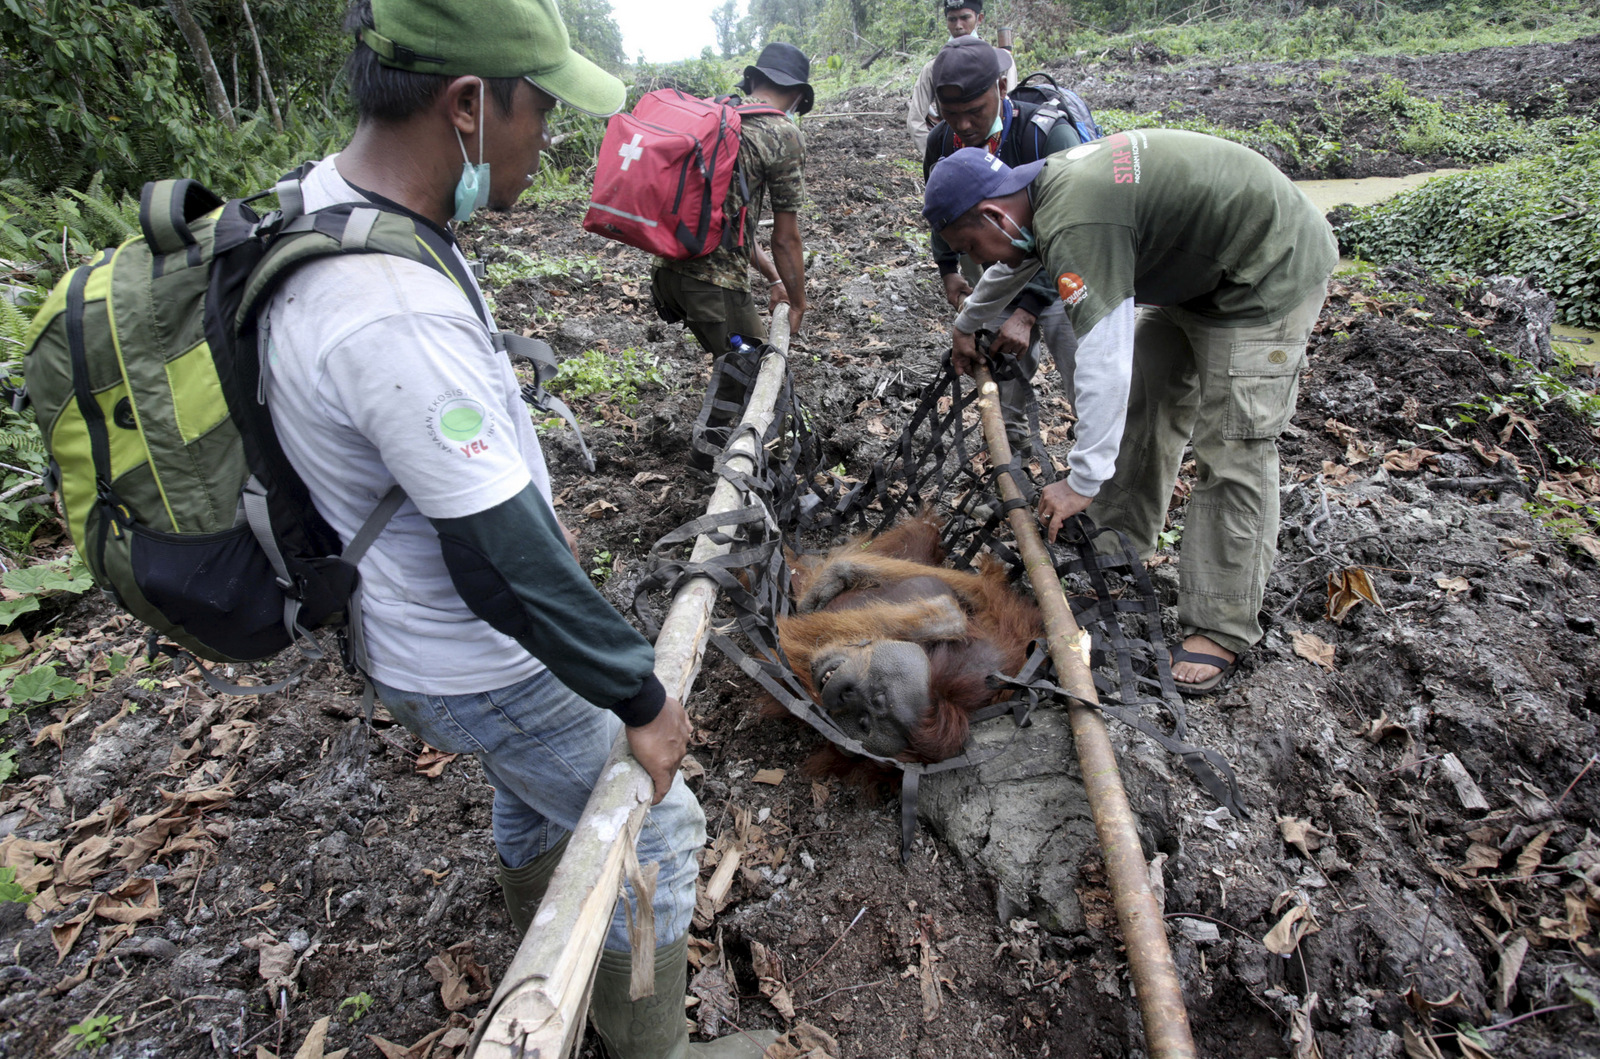 In this Thursday, Aug. 10, 2017 photo, conservationists of Sumatran Orangutan Conservation Program (SOCP) use a makeshift stretcher to carry a tranquilized orangutan as it is being relocated from a swath of destructed forest near a palm oil plantation at Tripa peat swamp in Aceh province, Indonesia. As demand for palm oil soars, plantations are expanding and companies drain the swamp, clear the forest of its native trees, and often setting illegal fires which in turn robs orangutans and other endangered species of their habitats, leaving the animals marooned on small swaths of forest, boxed-in on all sides by plantations. (AP Photo/Binsar Bakkara)